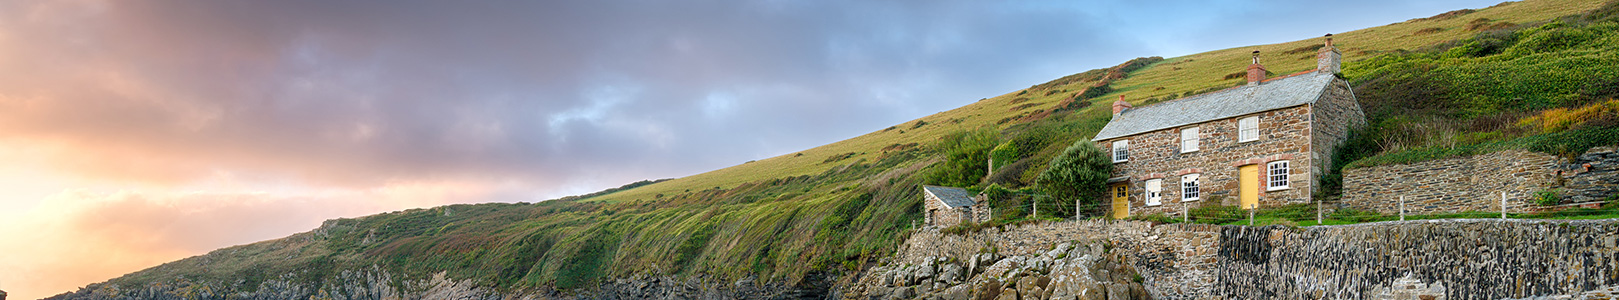 We arrange insurance protection for holiday cottages at competitive premiums.